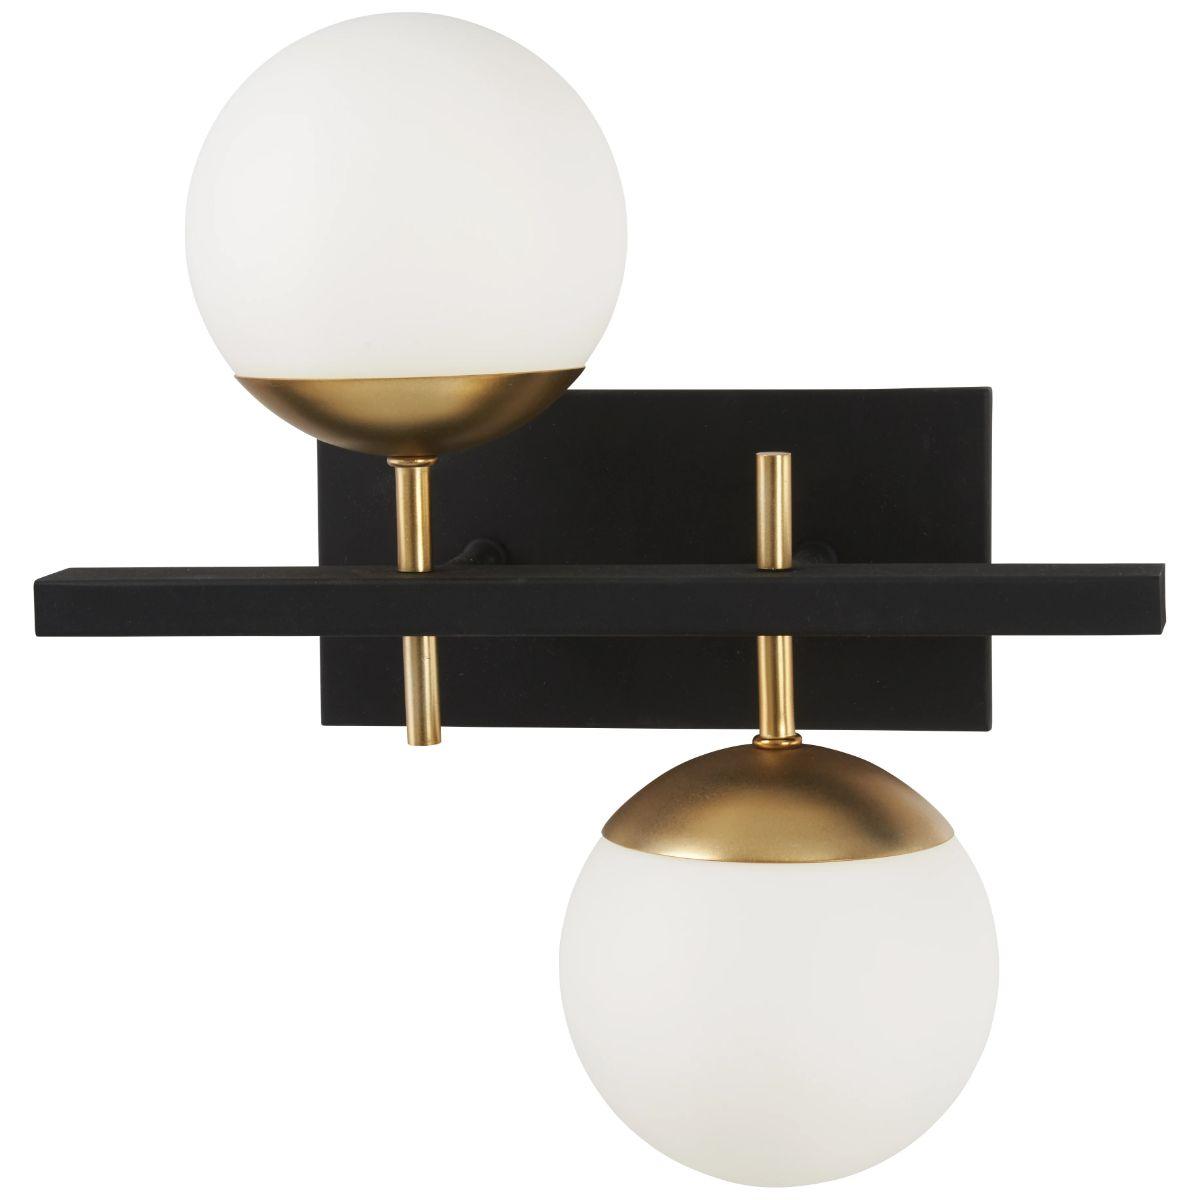 Alluria 16 in. Armed Sconce Black & Gold finish